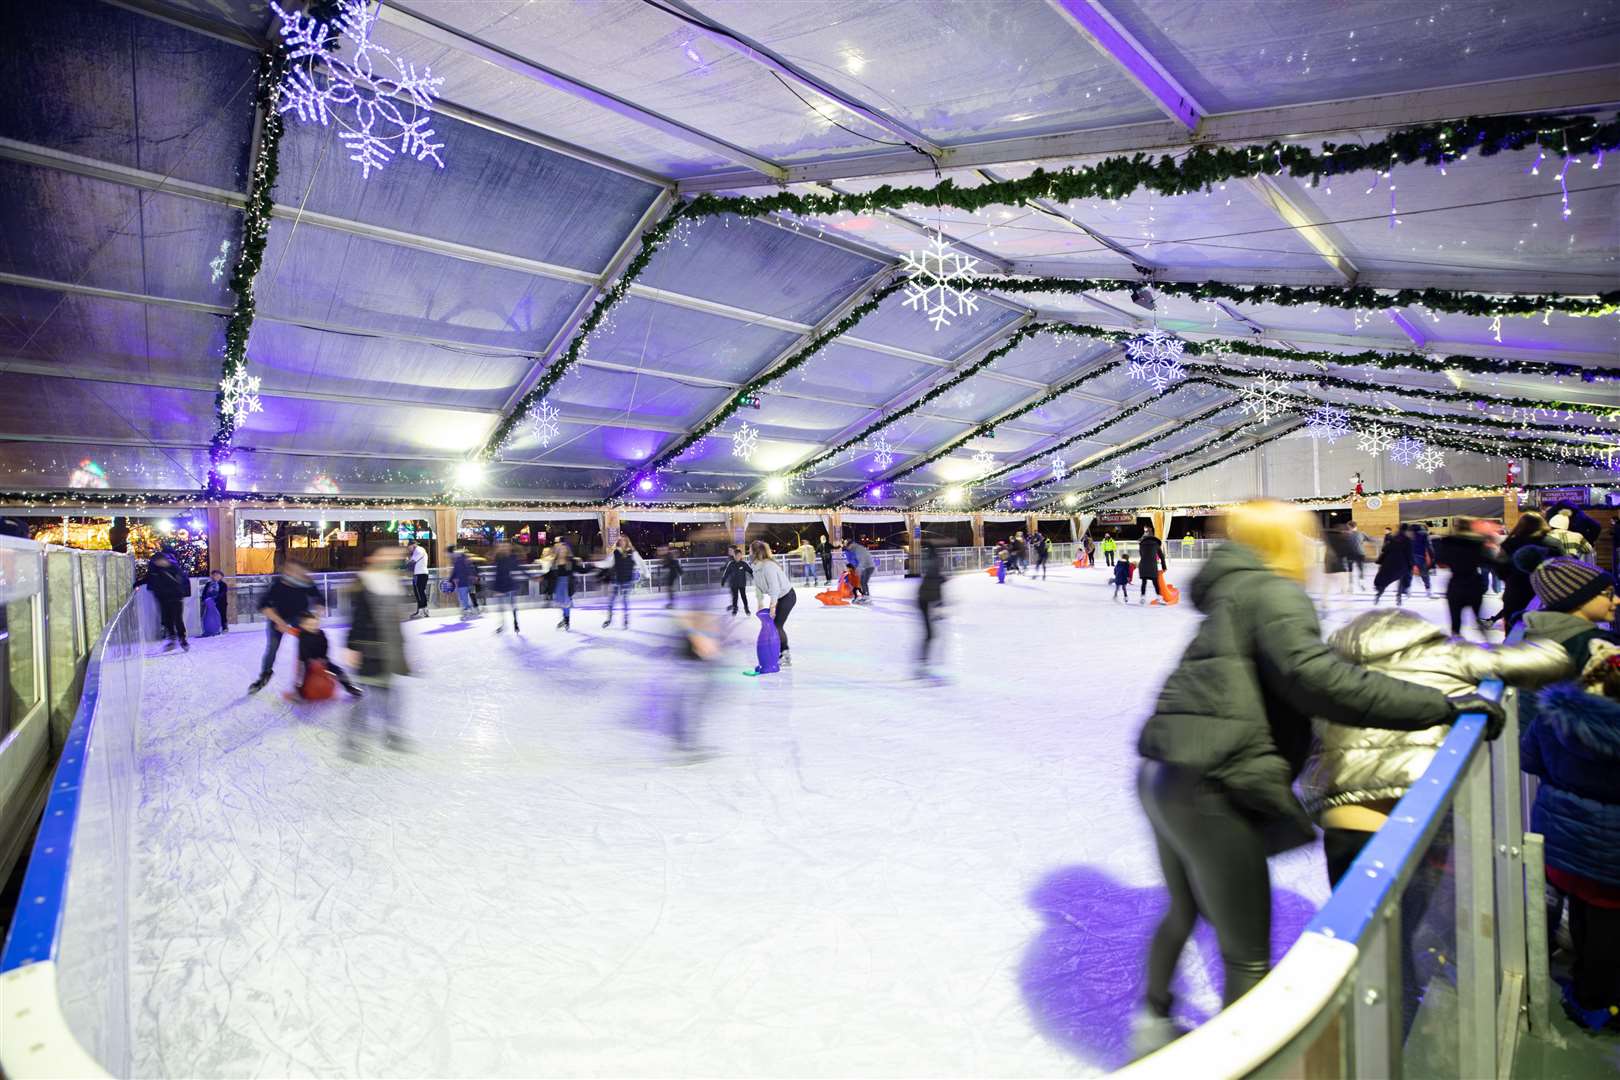 The ice rink outside The Village at Bluewater. Photo: Bluewater